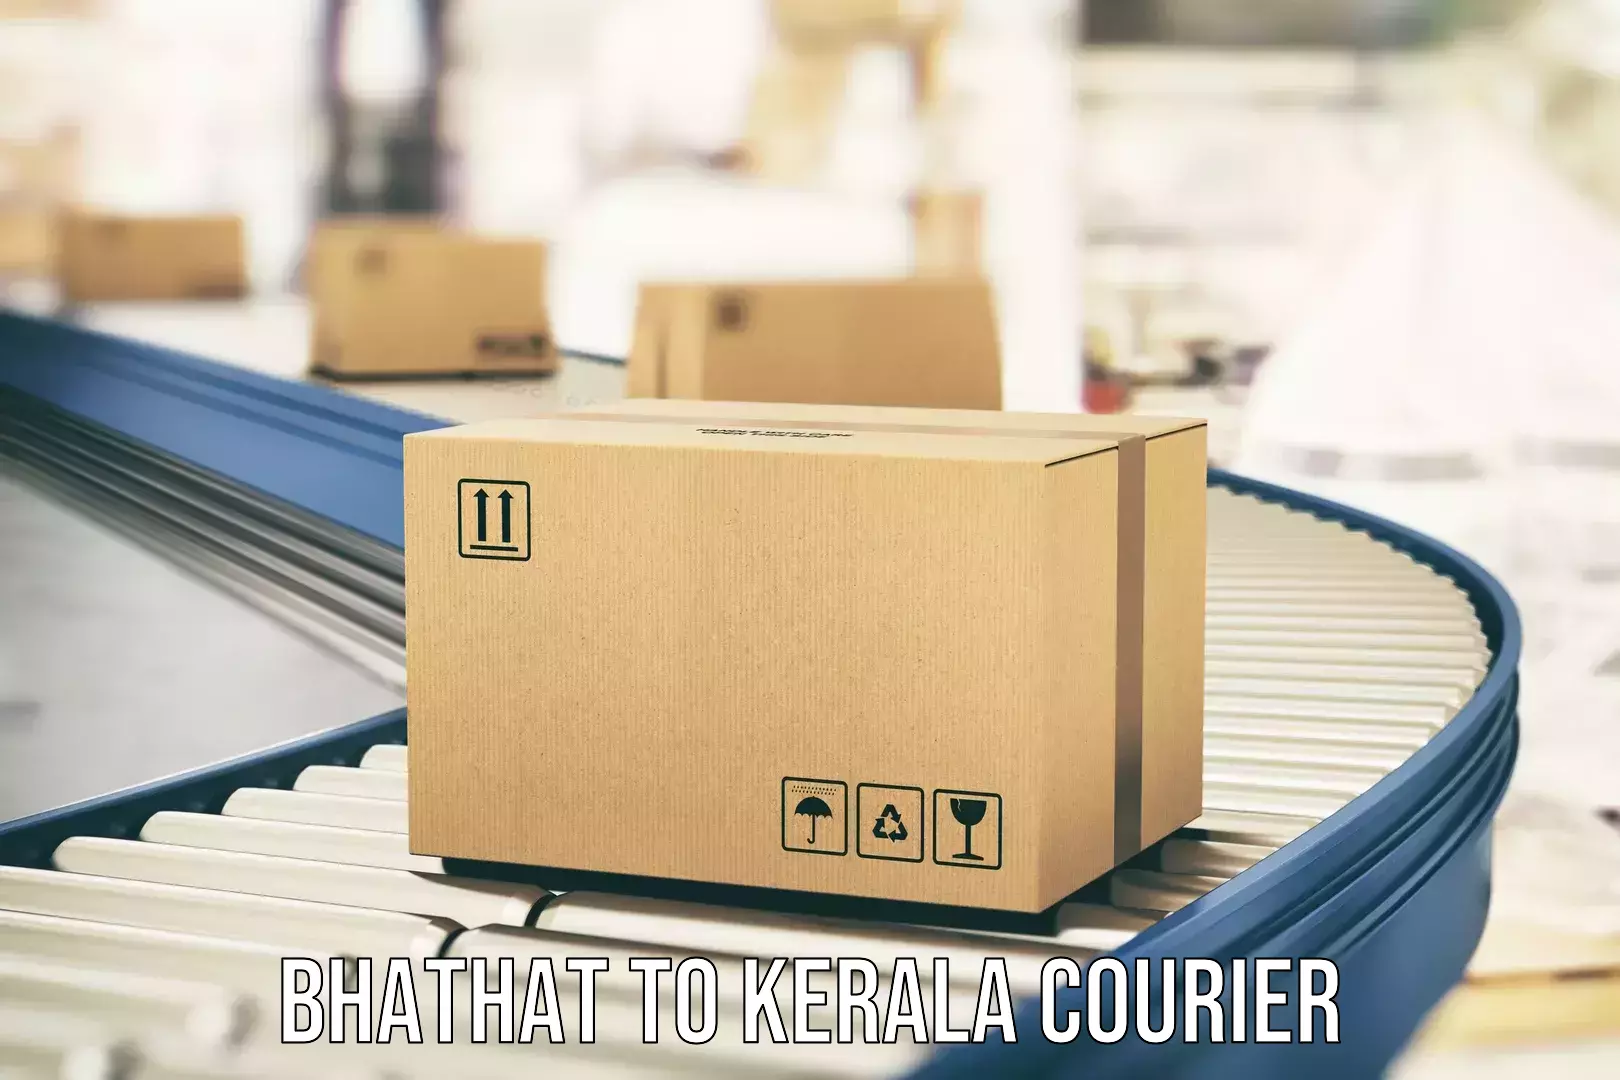 Professional furniture movers Bhathat to Kalanjoor